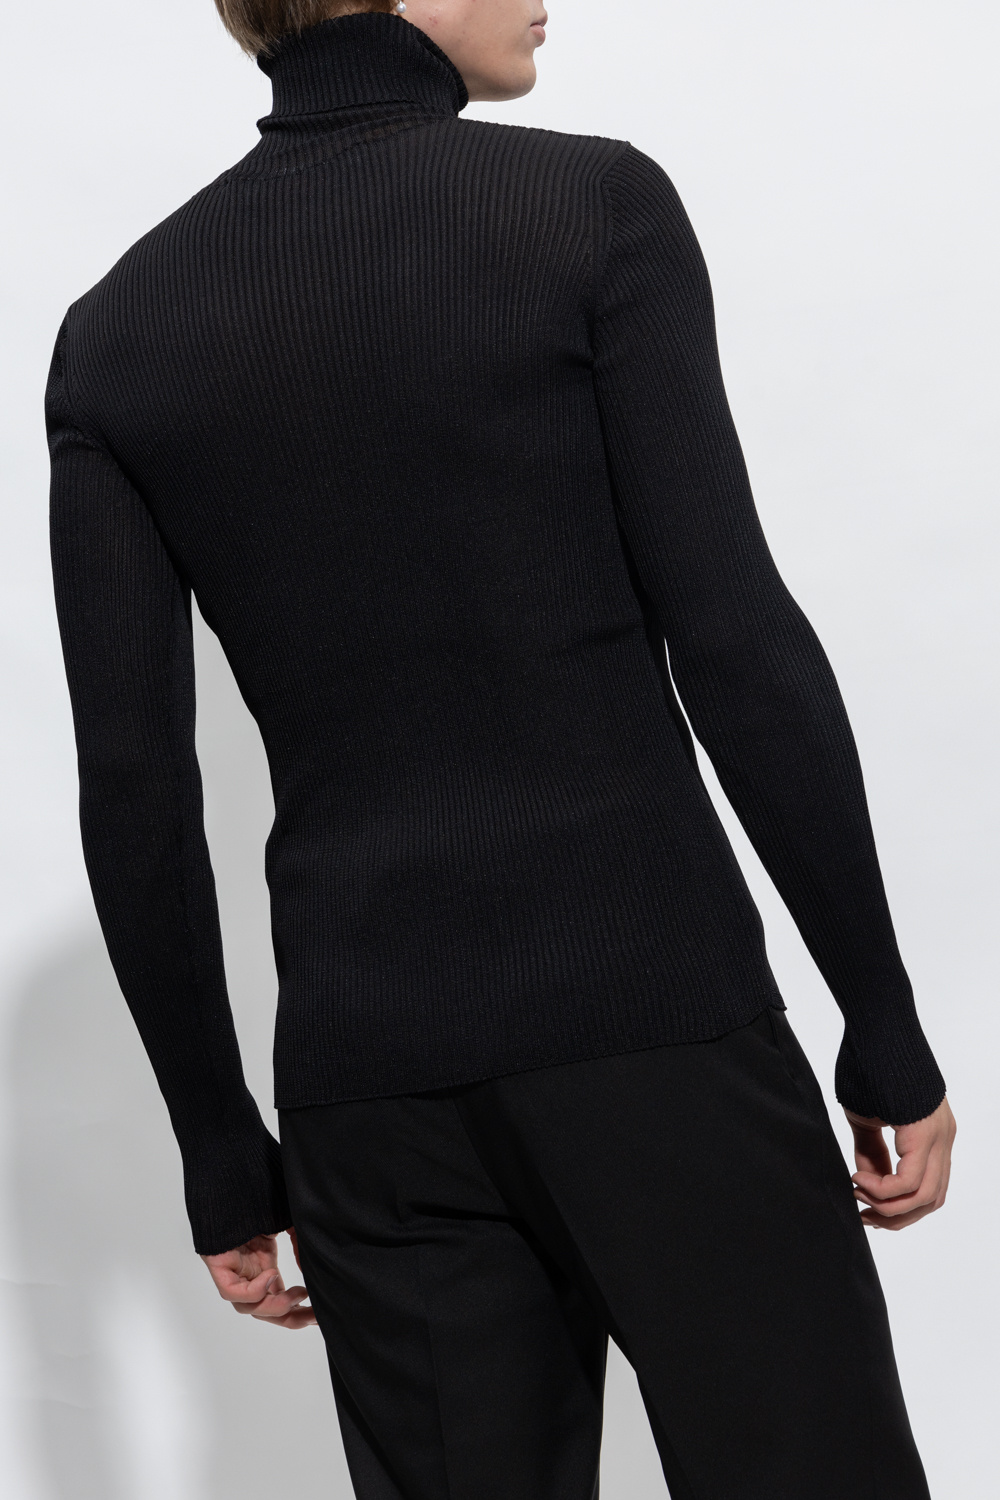 Off-White Ribbed turtleneck top